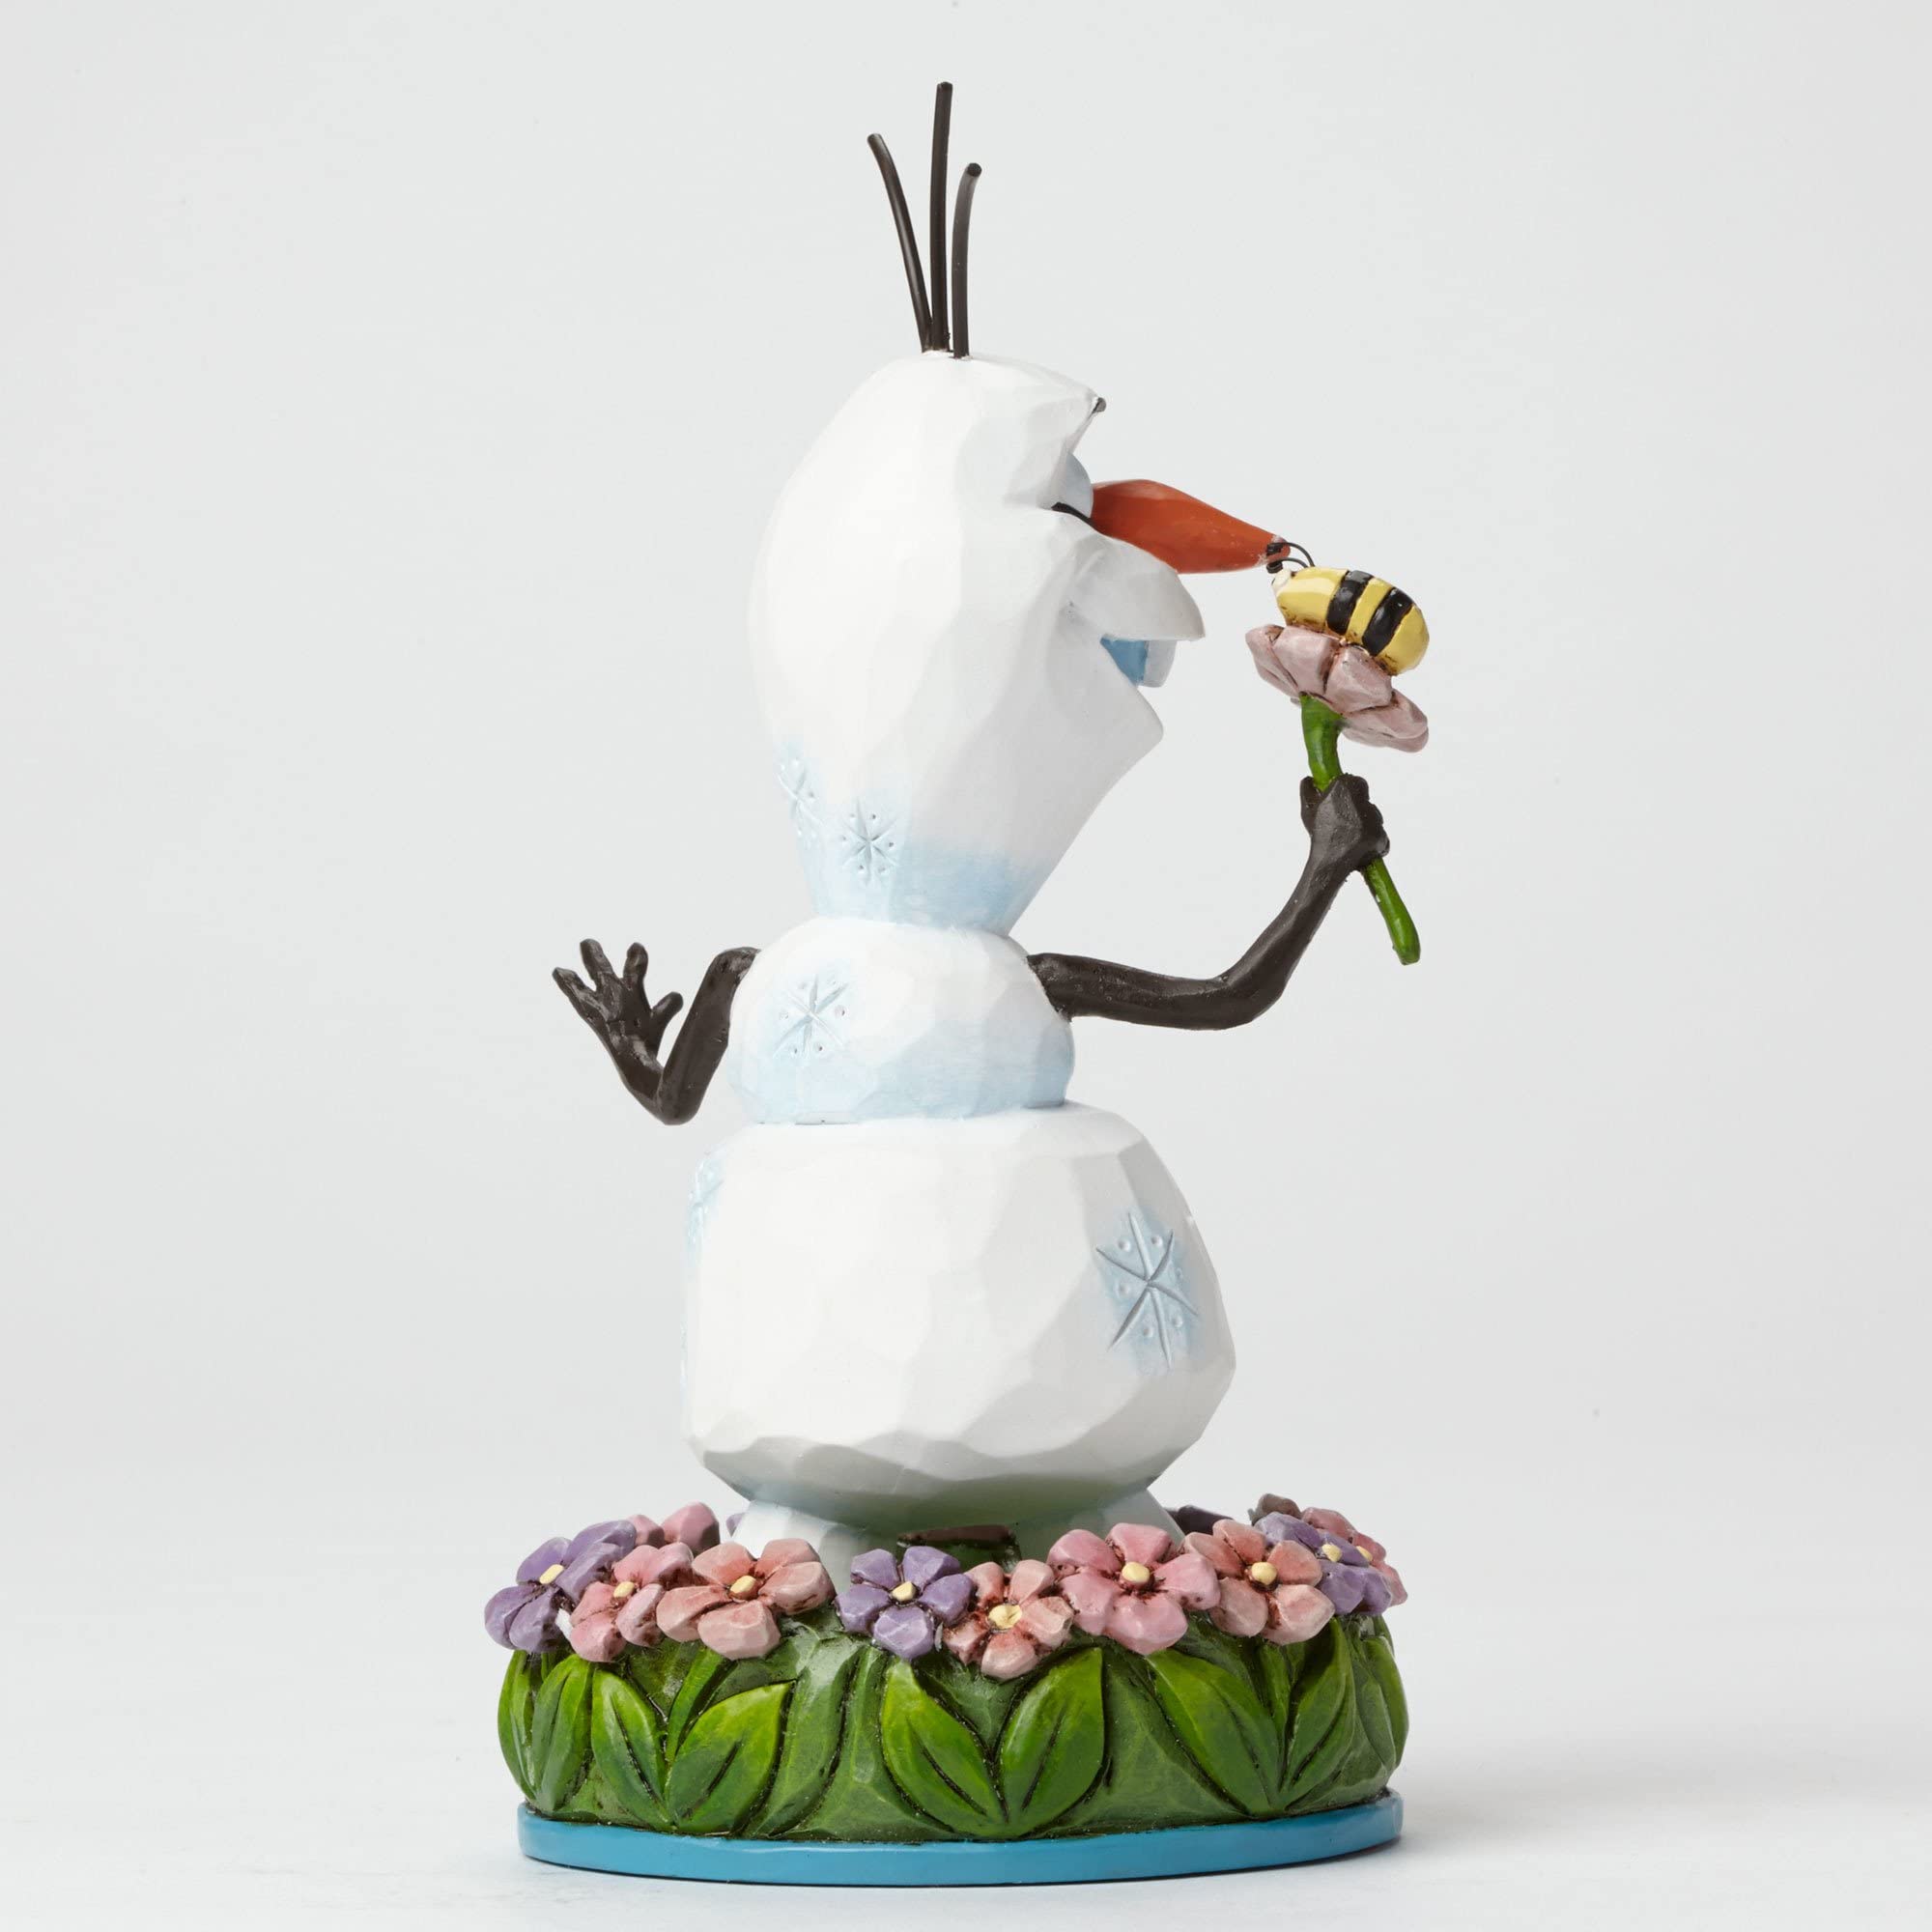 Enesco Disney Traditions Frozen Showcase Collection Dreaming of Summer Olaf the Snowman Figurine #4046037